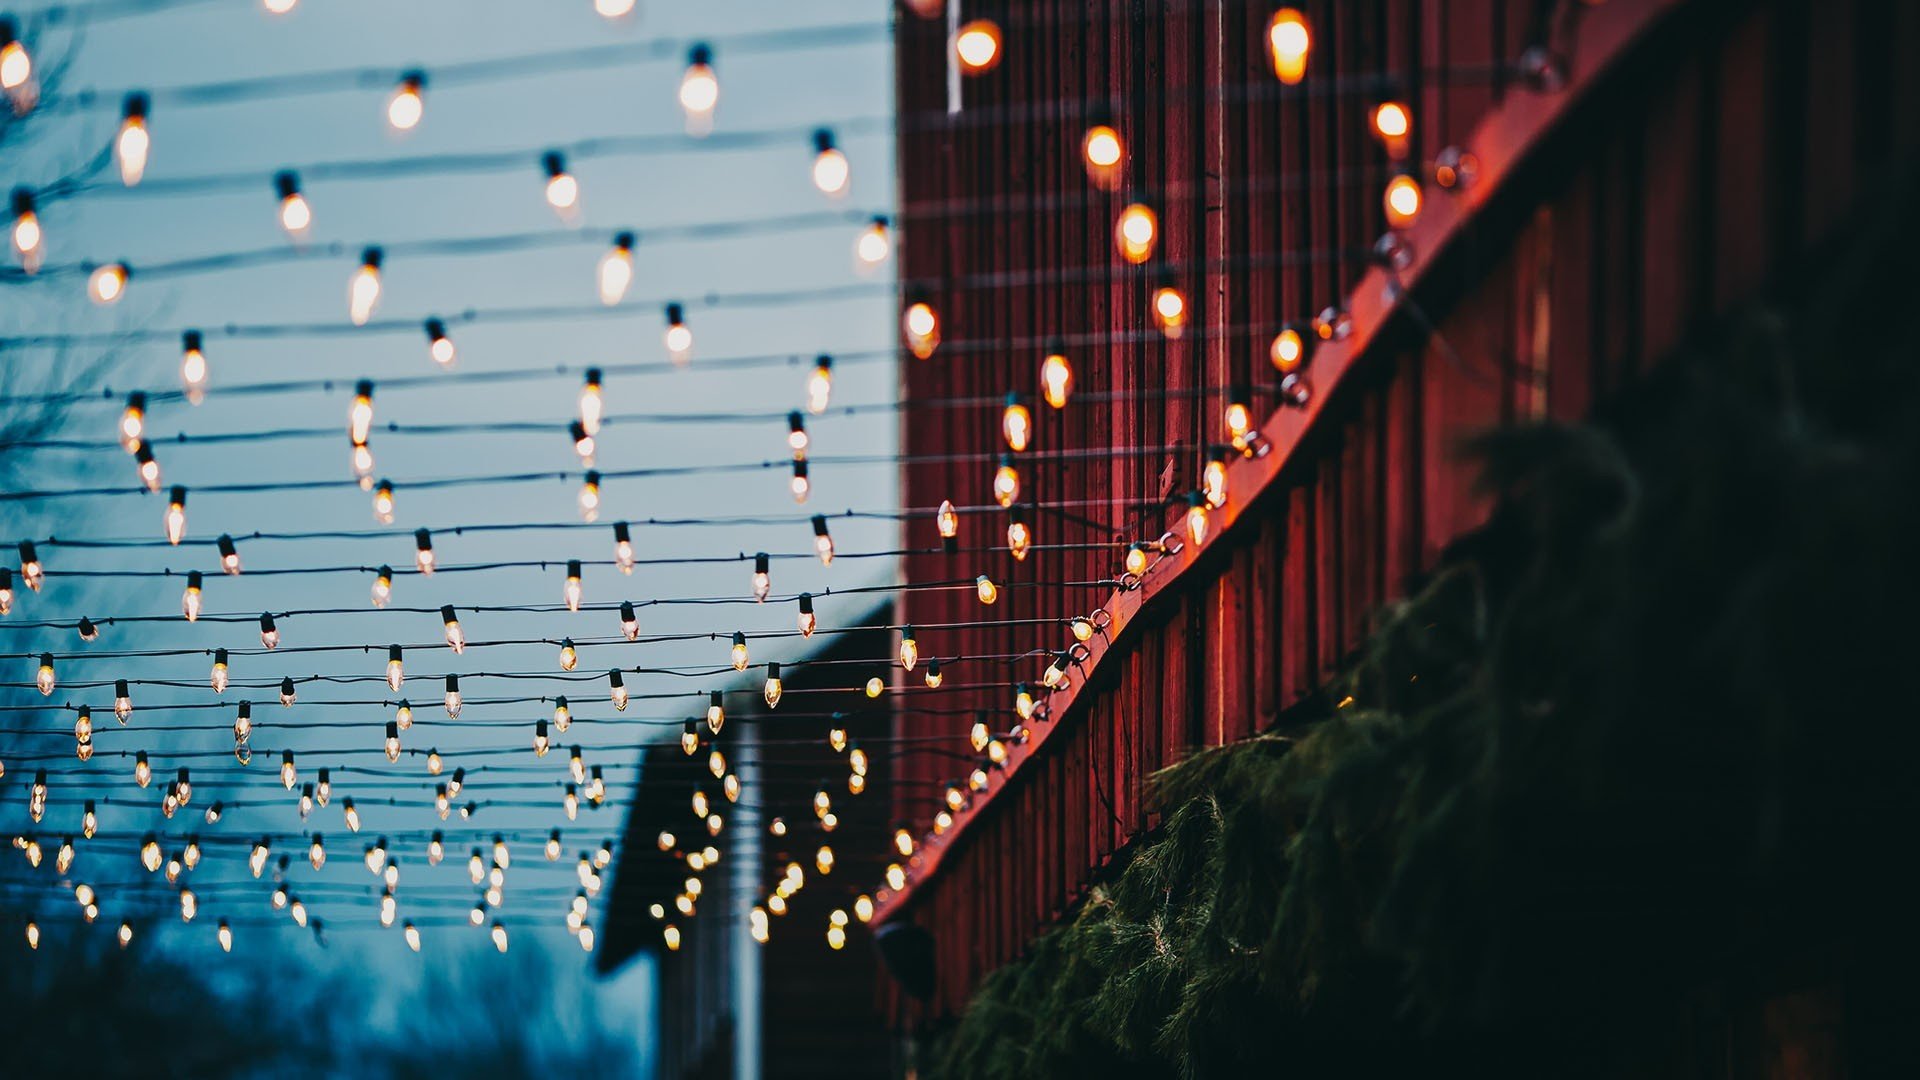 Wallpaper, sunlight, night, building, red, reflection, plants, skyscraper, blue, evening, lamp, bokeh, christmas lights, wires, light, color, lighting, line, stage, darkness 1920x1080